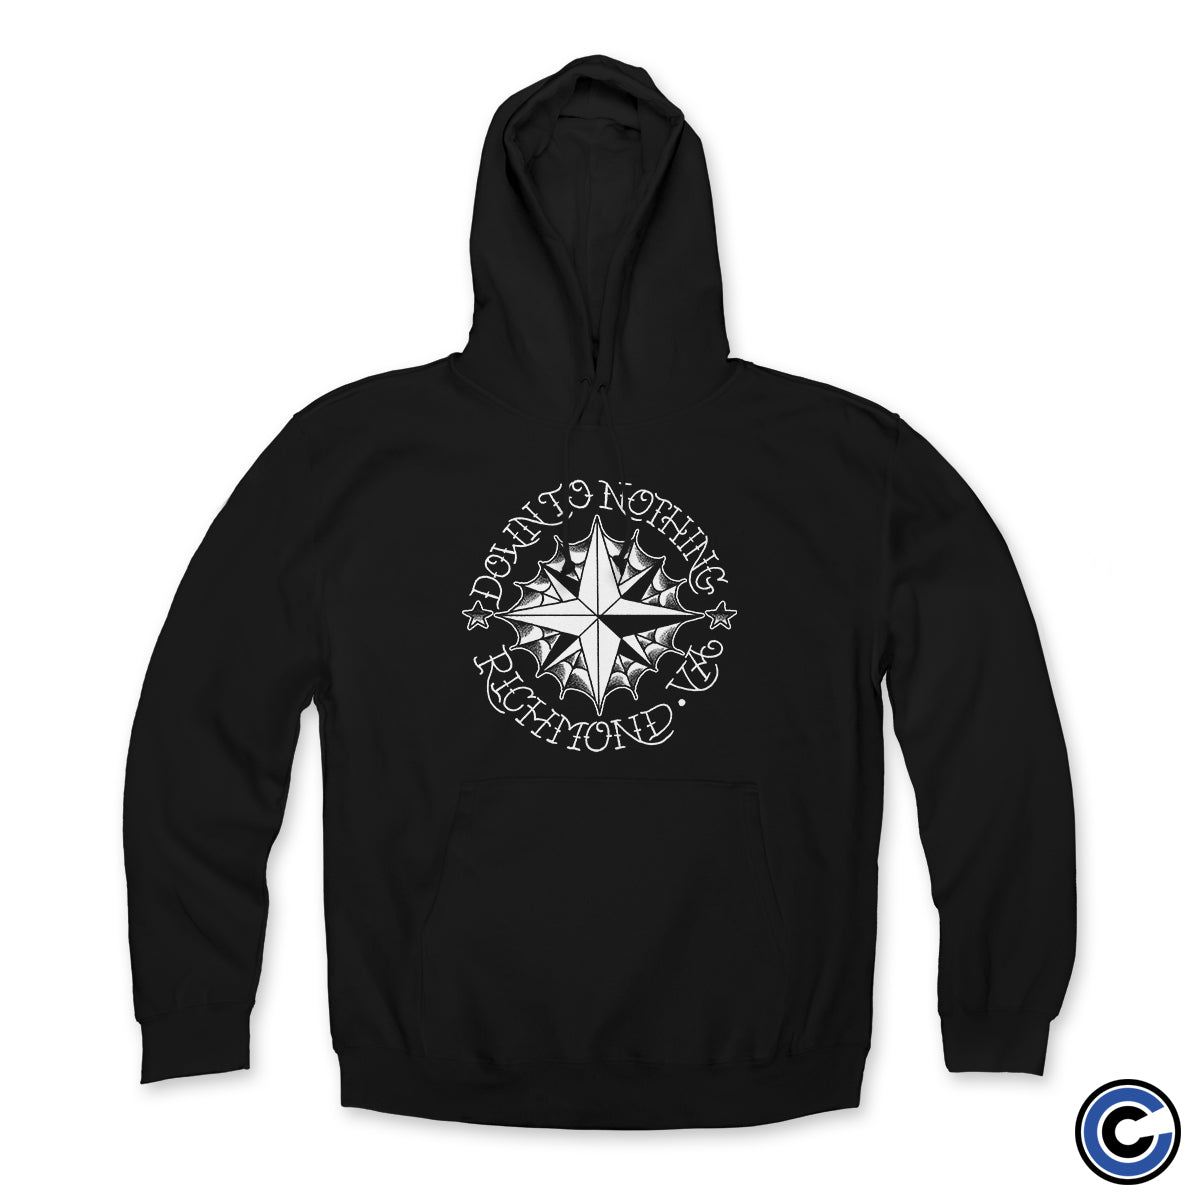 Down To Nothing "Compass" Hoodie